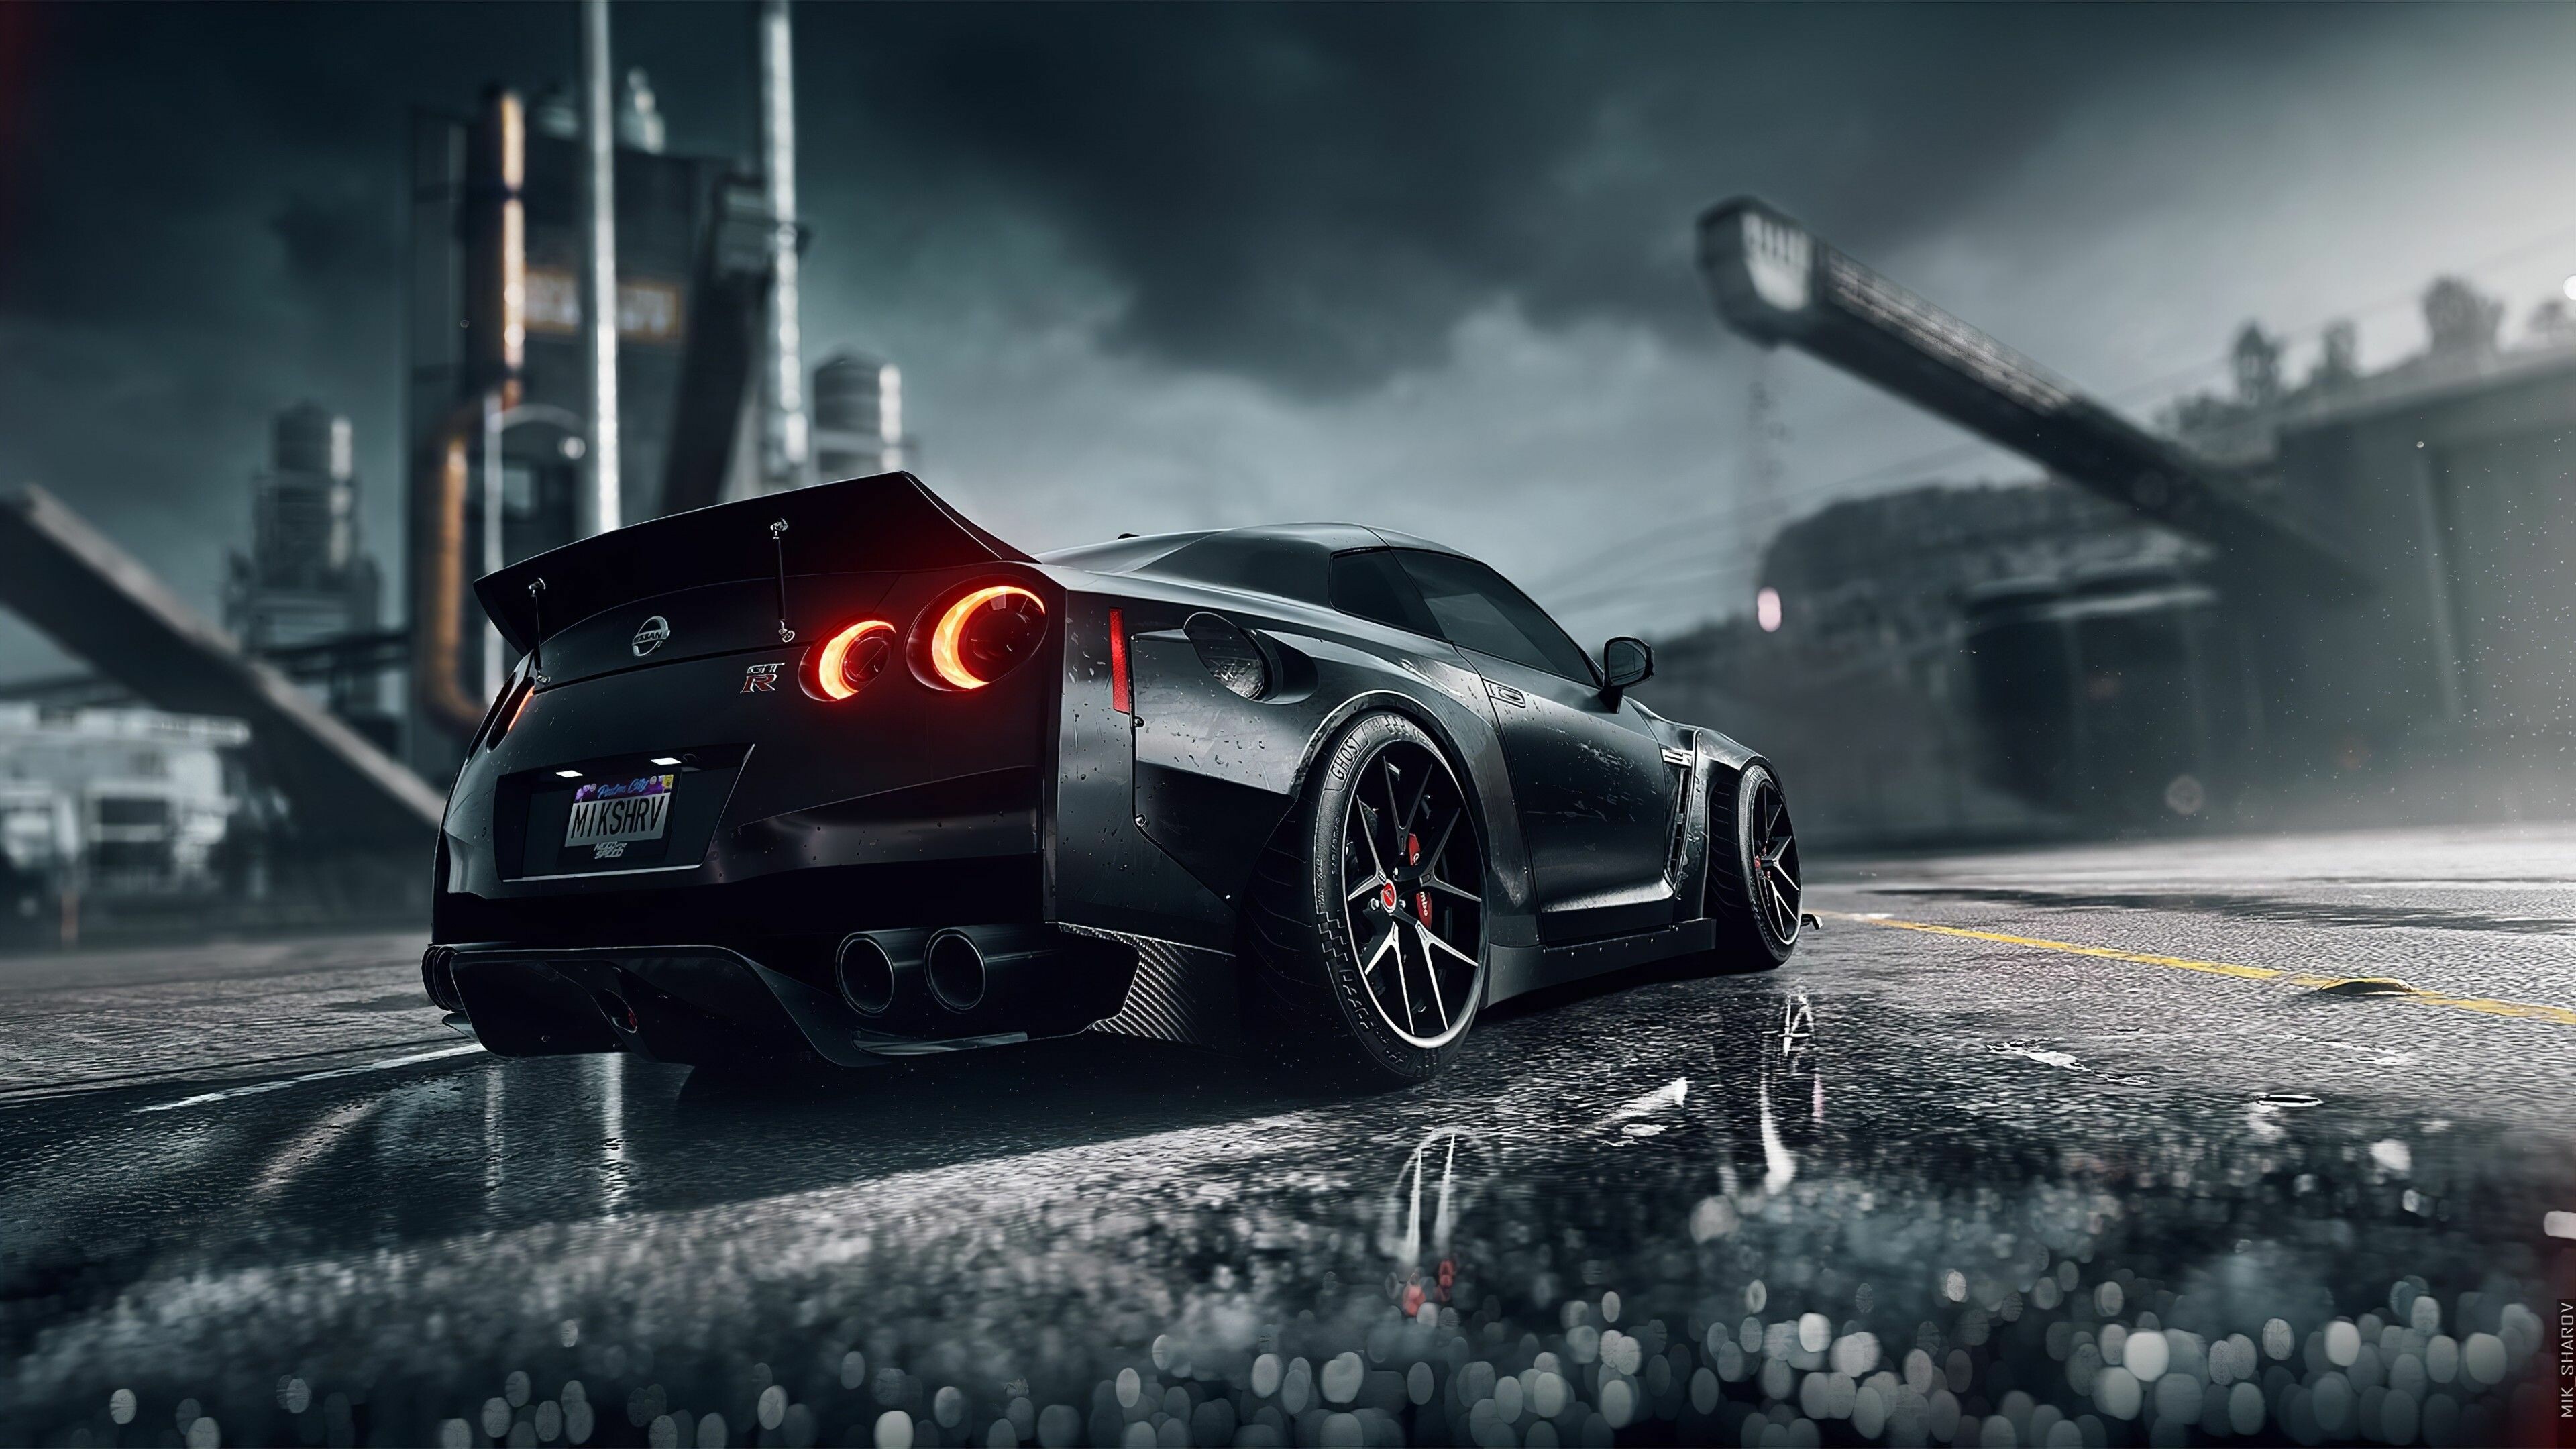 Nissan: GT-R, A sporty coupe with a well-earned reputation for offering huge performance. 3840x2160 4K Wallpaper.